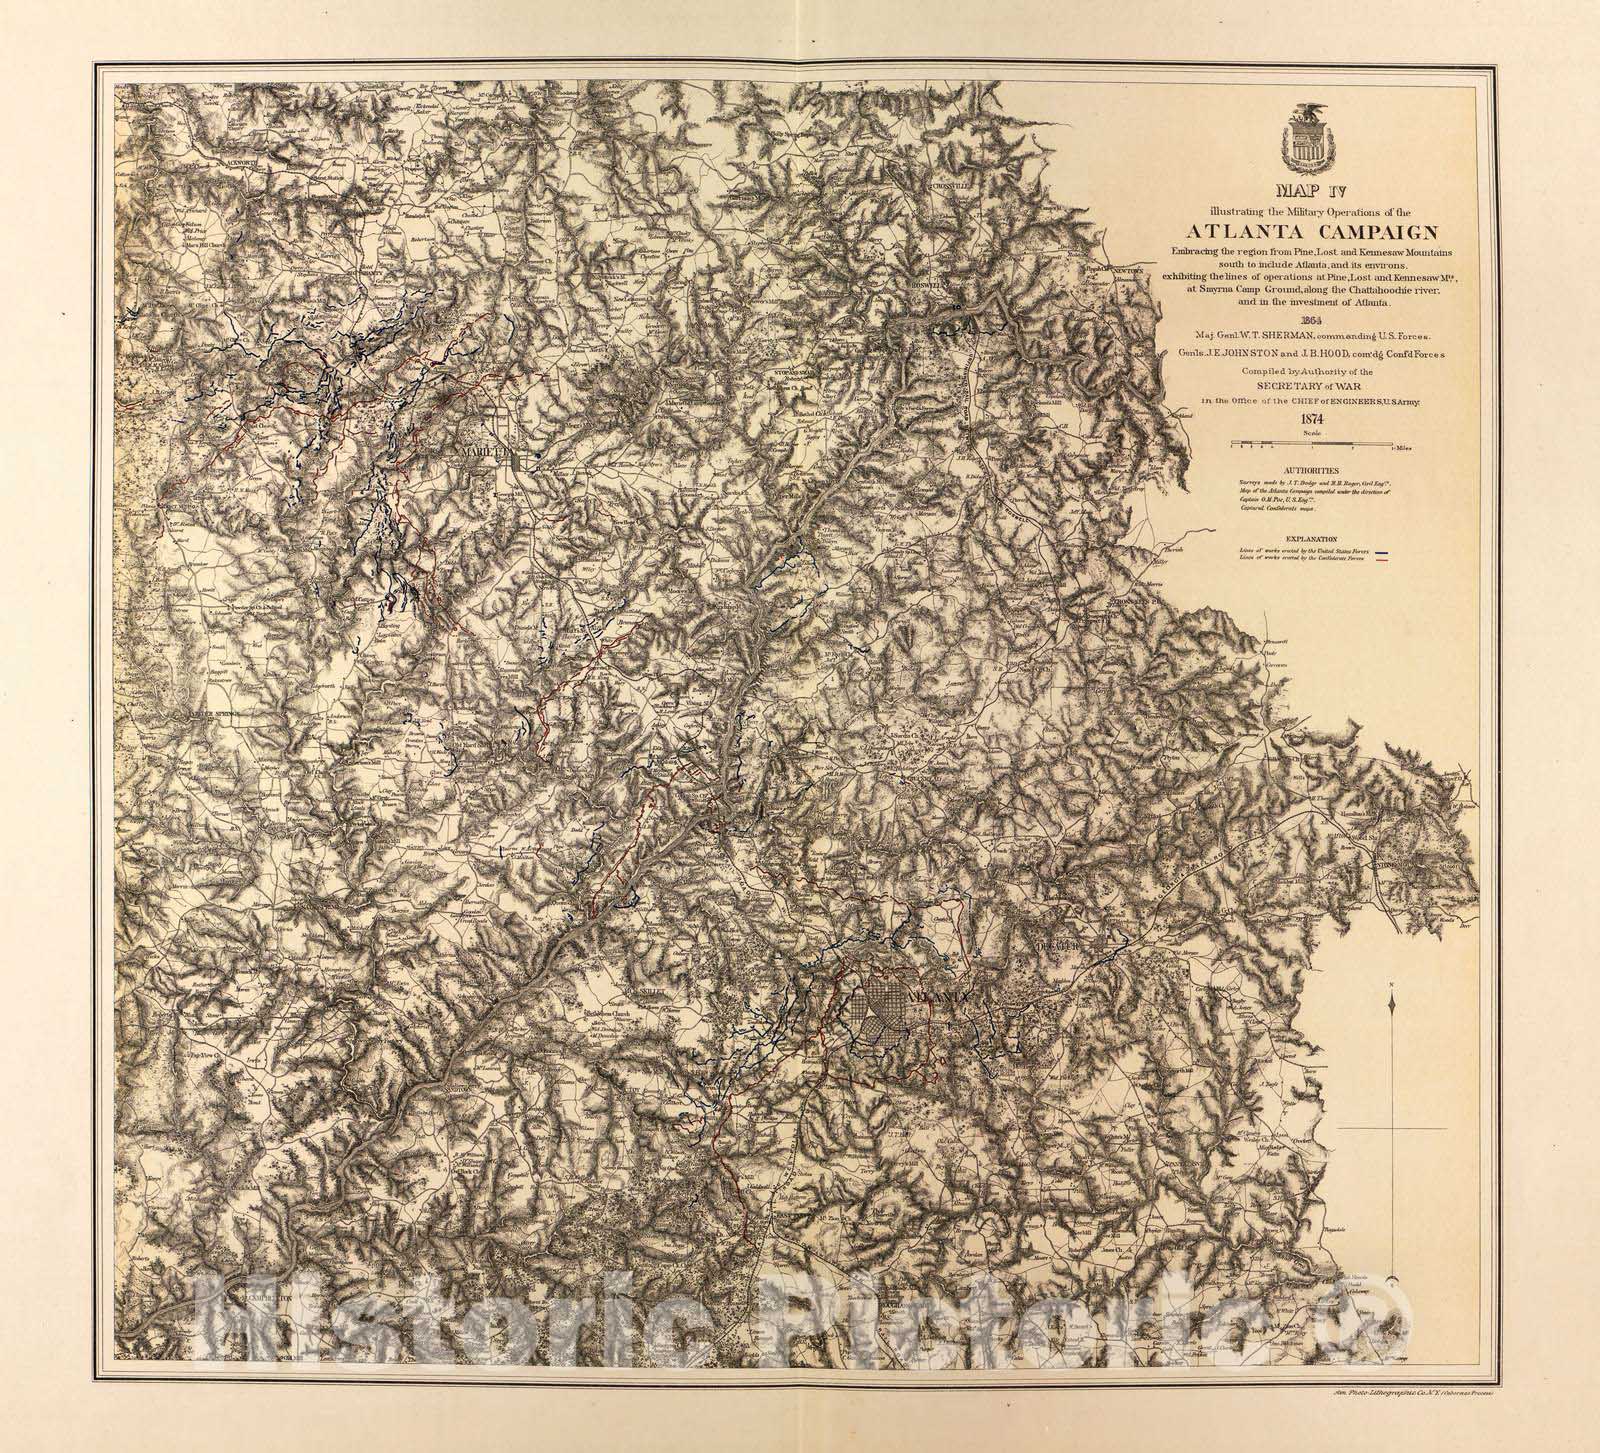 Historic 1879 Map - Military maps. - Atlanta Campaign, Includes Pine, Lost, and Kennesaw Mountains;Smyrna Camp Ground